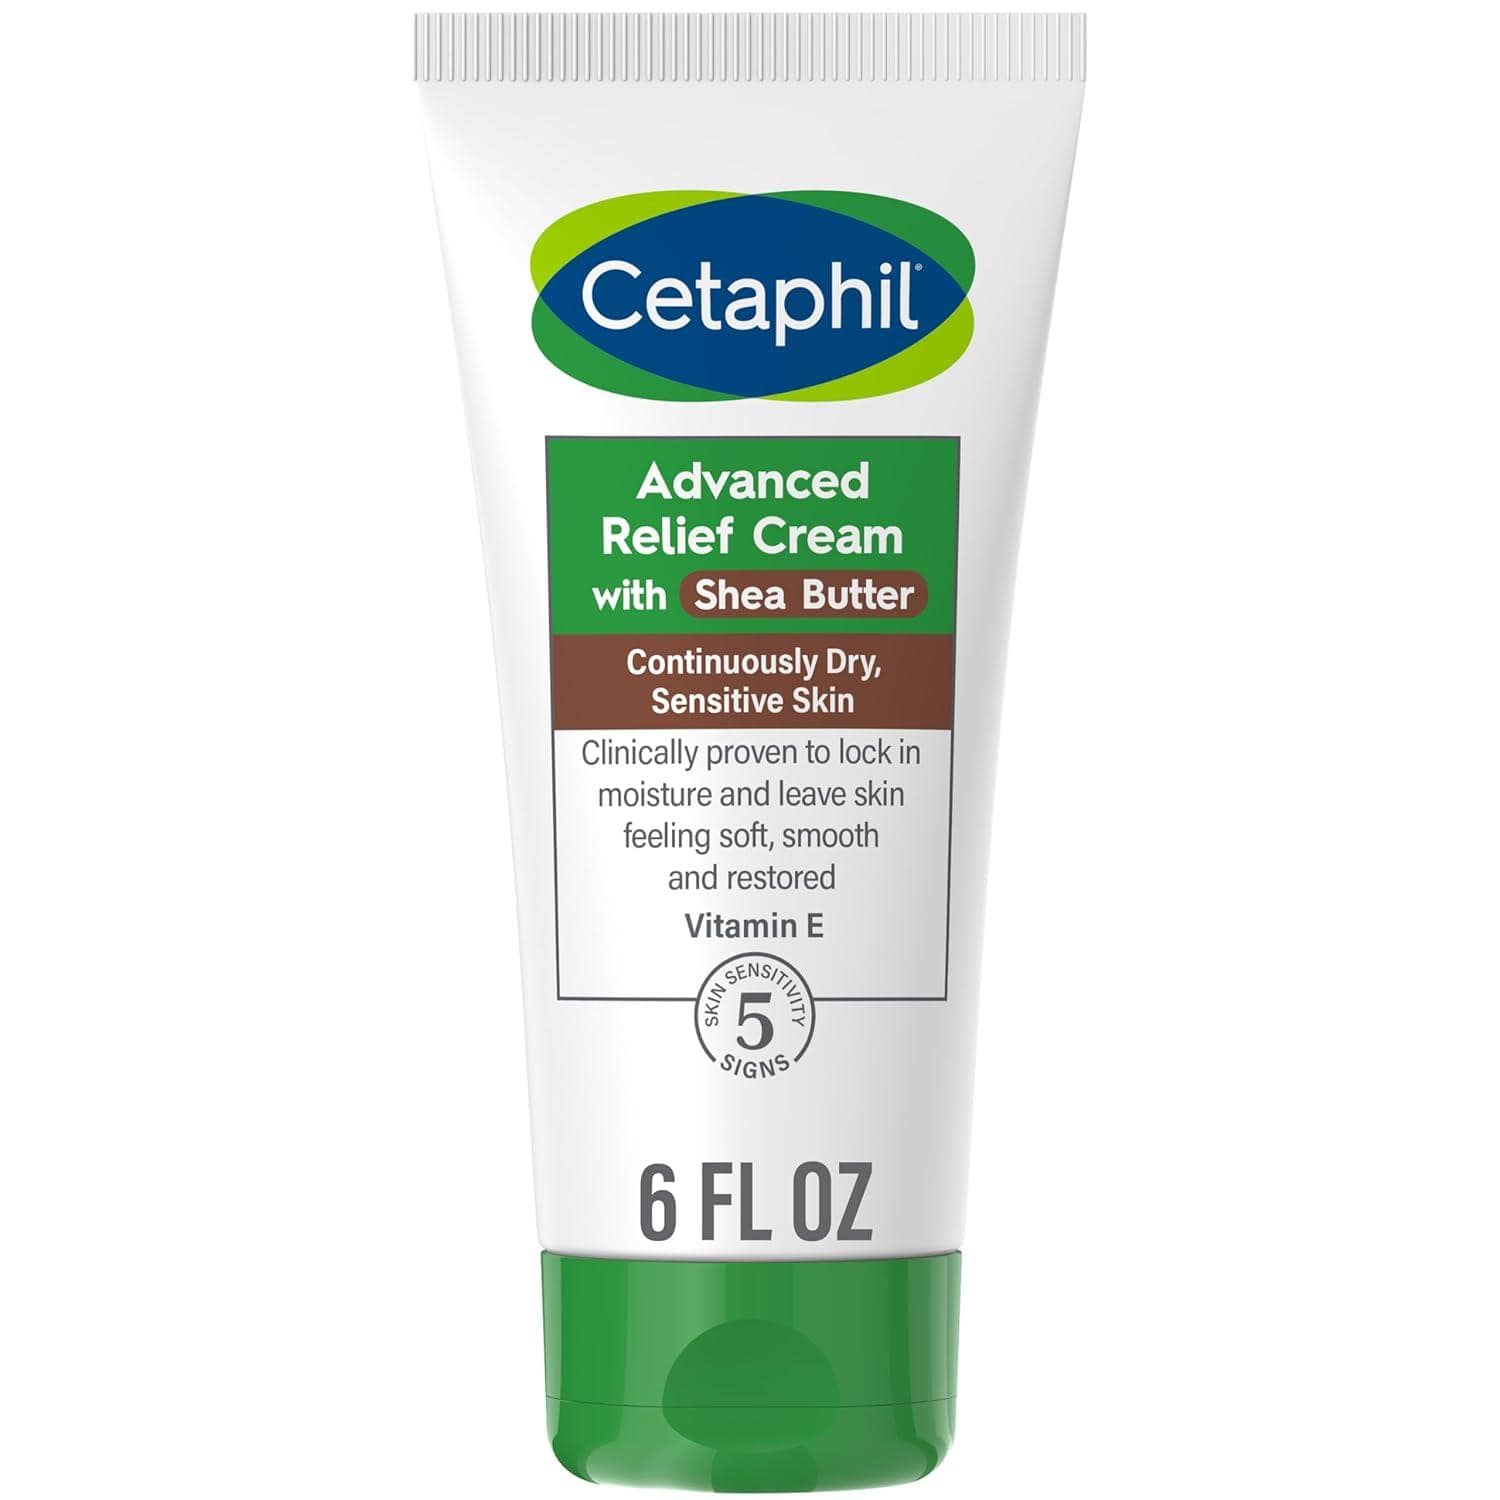 dermatologist-recommended luxury with Cetaphil's Advanced Relief Cream=b hypoallergenic, fragrance-free, and a powerhouse Moisturizing Cream for 48-hour hydration.